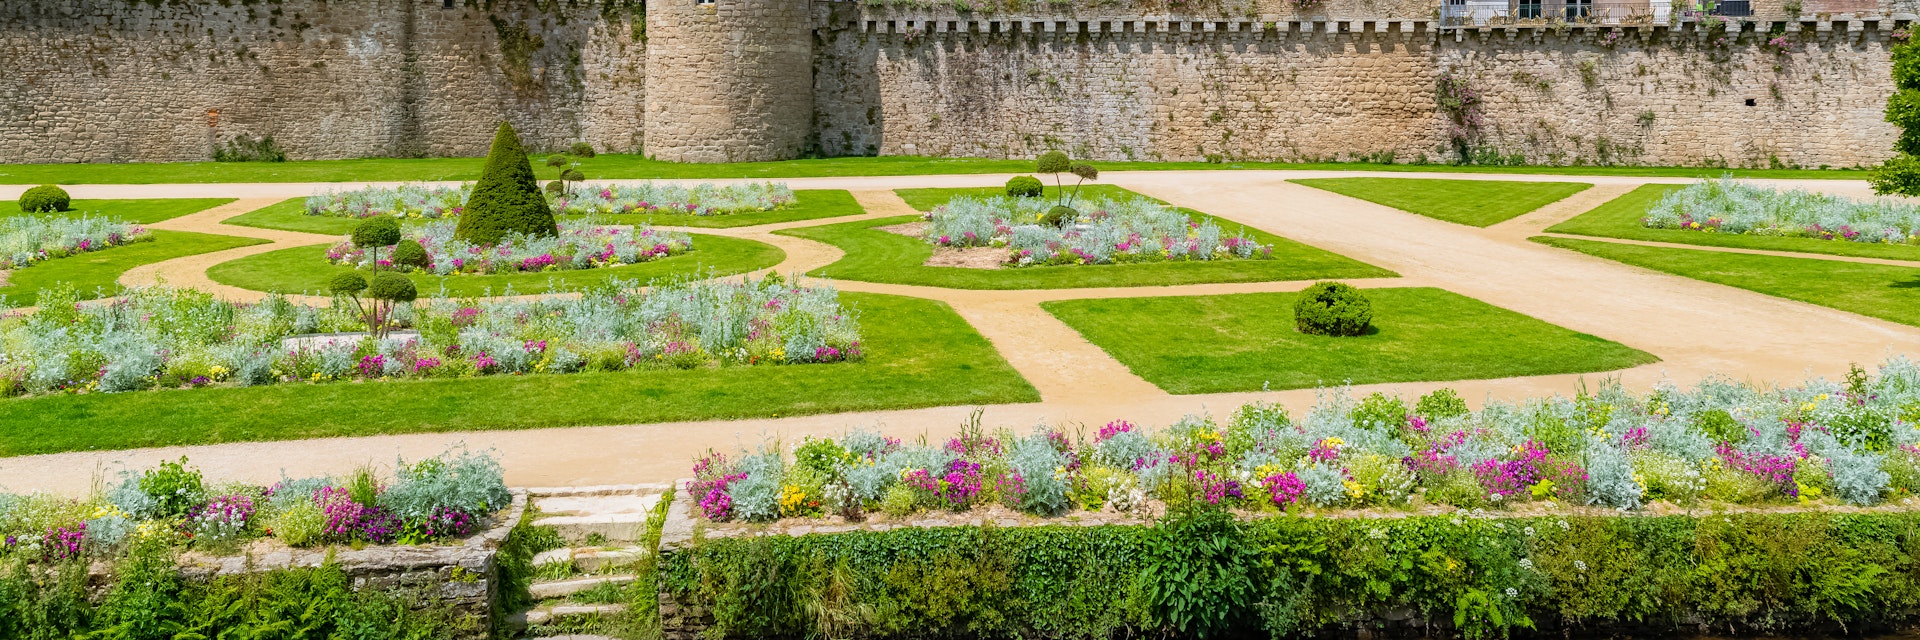 The garden of the ramparts, a public park, with the old city behind the walls in Vannes, France.